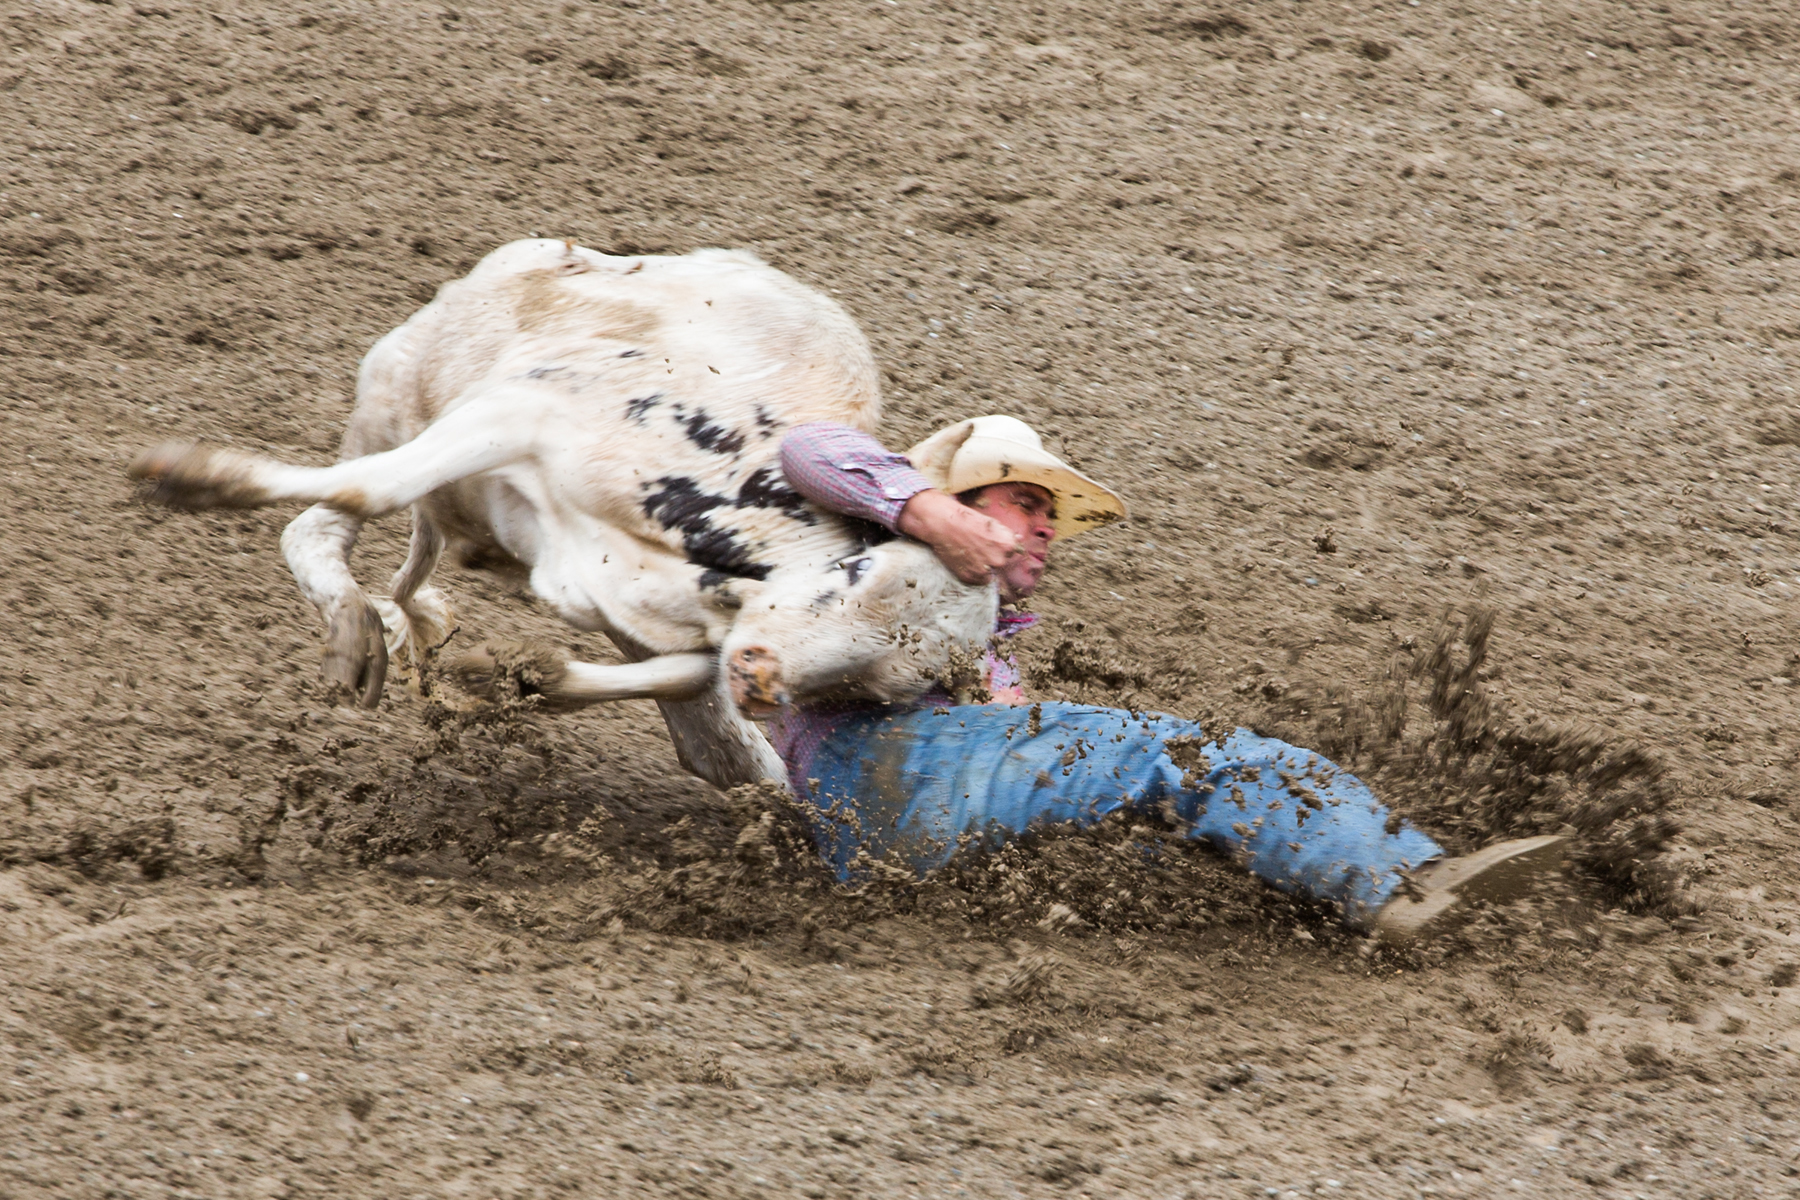 Steer wrestling at Home of Champions Rodeo, Red Lodge, MT, July 4, 2021.  Click for next photo.